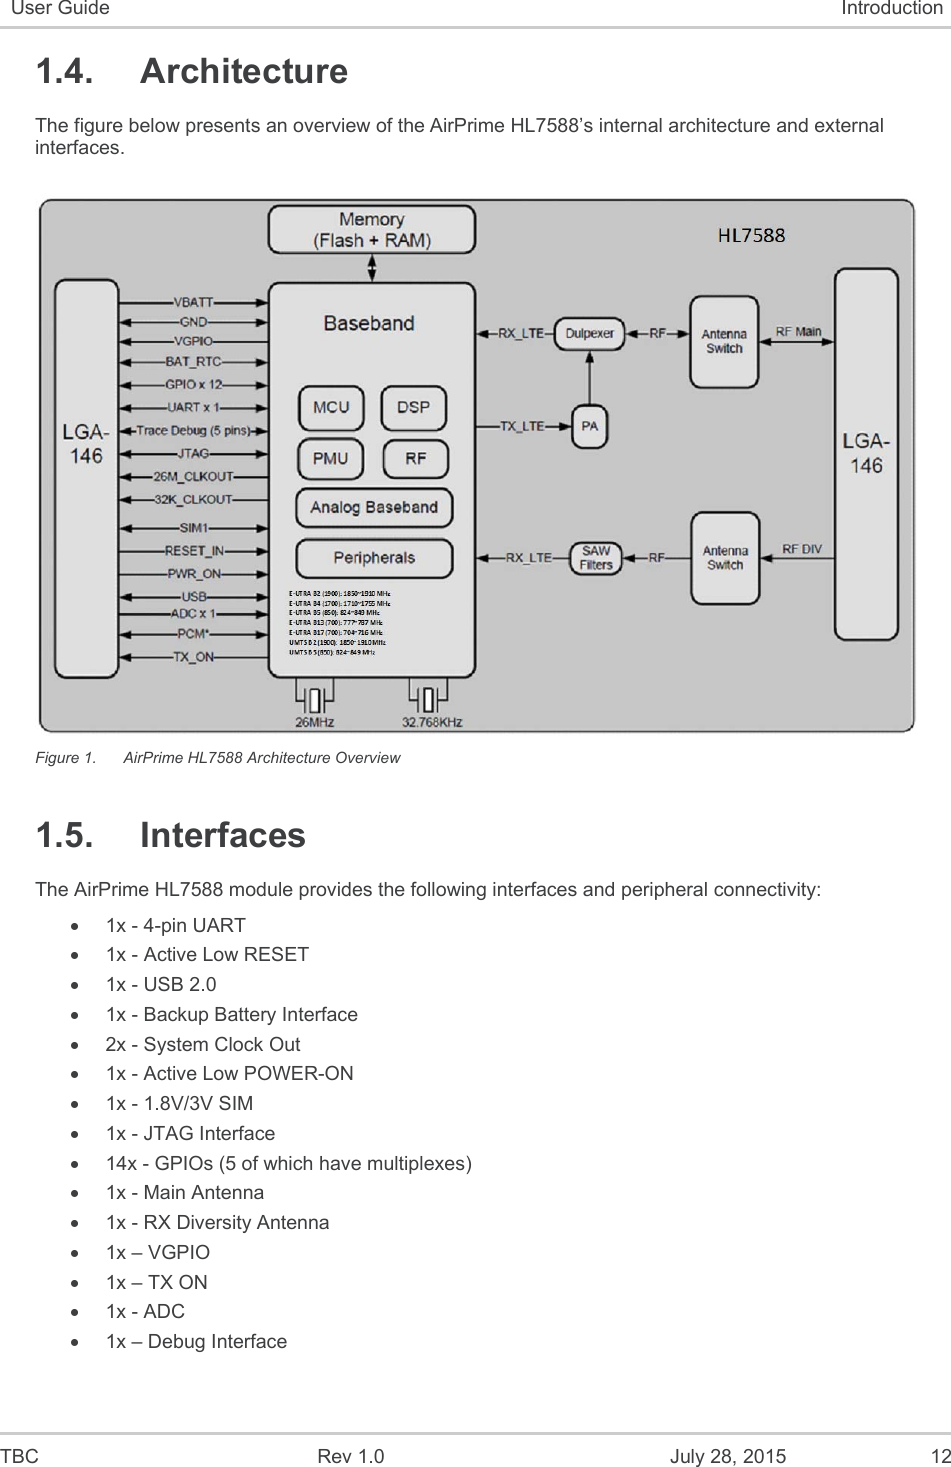  TBC  Rev 1.0  July 28, 2015  12 User Guide  Introduction 1.4.  Architecture The figure below presents an overview of the AirPrime HL7588’s internal architecture and external interfaces.   Figure 1.  AirPrime HL7588 Architecture Overview 1.5.  Interfaces The AirPrime HL7588 module provides the following interfaces and peripheral connectivity:   1x - 4-pin UART   1x - Active Low RESET   1x - USB 2.0   1x - Backup Battery Interface   2x - System Clock Out   1x - Active Low POWER-ON   1x - 1.8V/3V SIM   1x - JTAG Interface    14x - GPIOs (5 of which have multiplexes)   1x - Main Antenna   1x - RX Diversity Antenna  1x – VGPIO  1x – TX ON   1x - ADC   1x – Debug Interface 